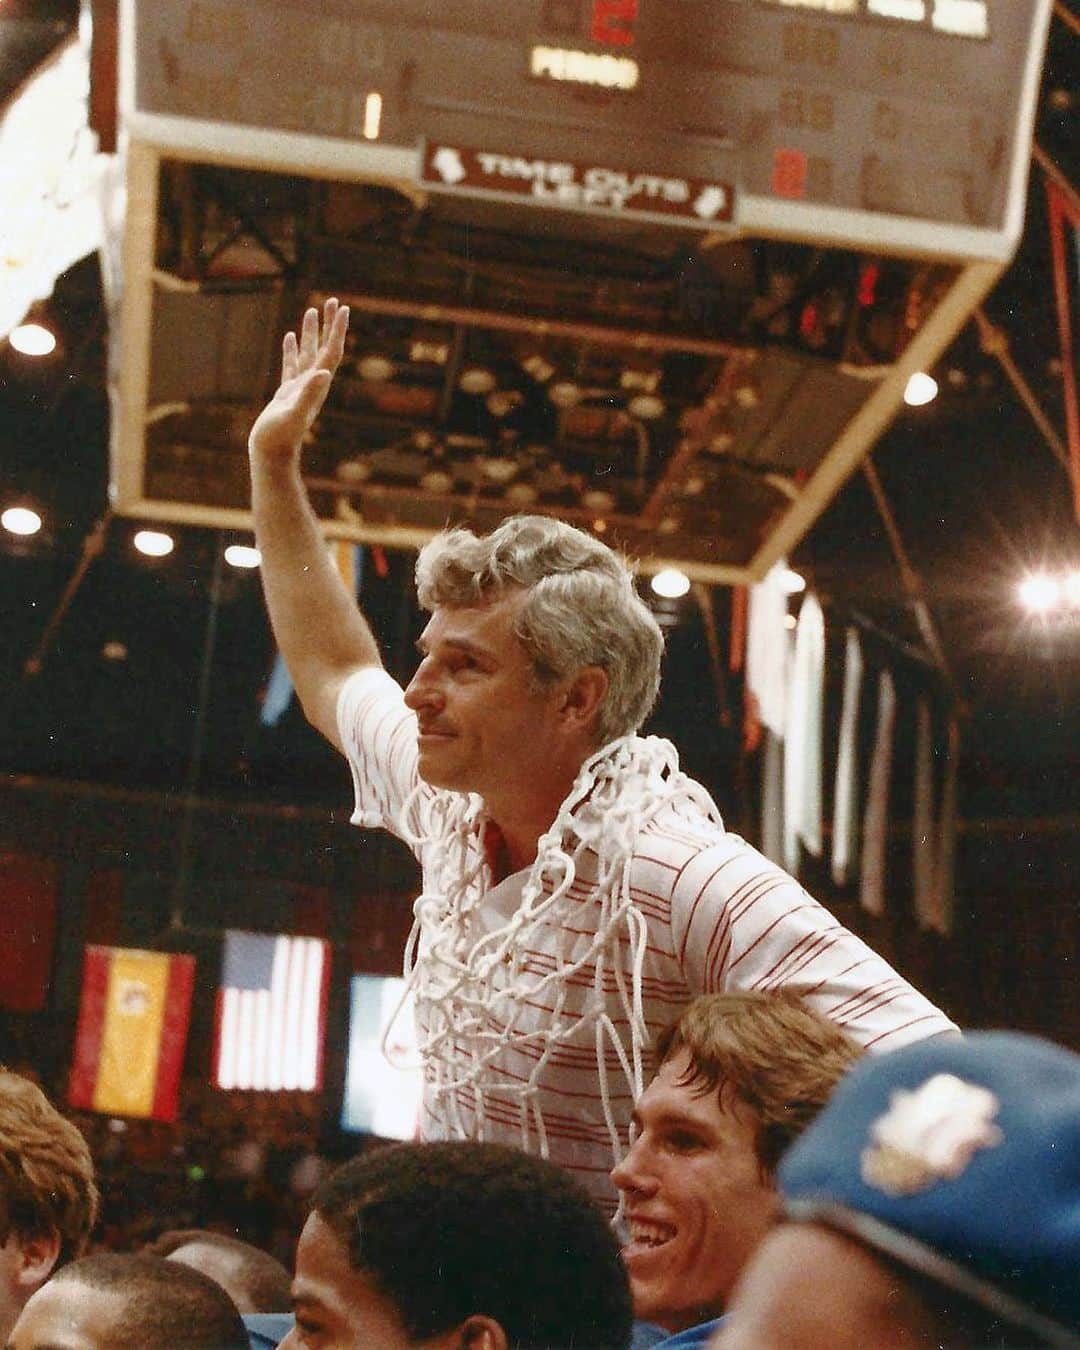 USA Basketballのインスタグラム：「USA Basketball celebrates the life & legacy of coaching legend Bob Knight.  Coach Knight led U.S. teams to gold medals at the 1979 Pan American Games & the 1984 Olympics.   We remember his contributions to the game & send our condolences to Coach Knight's loved ones.」